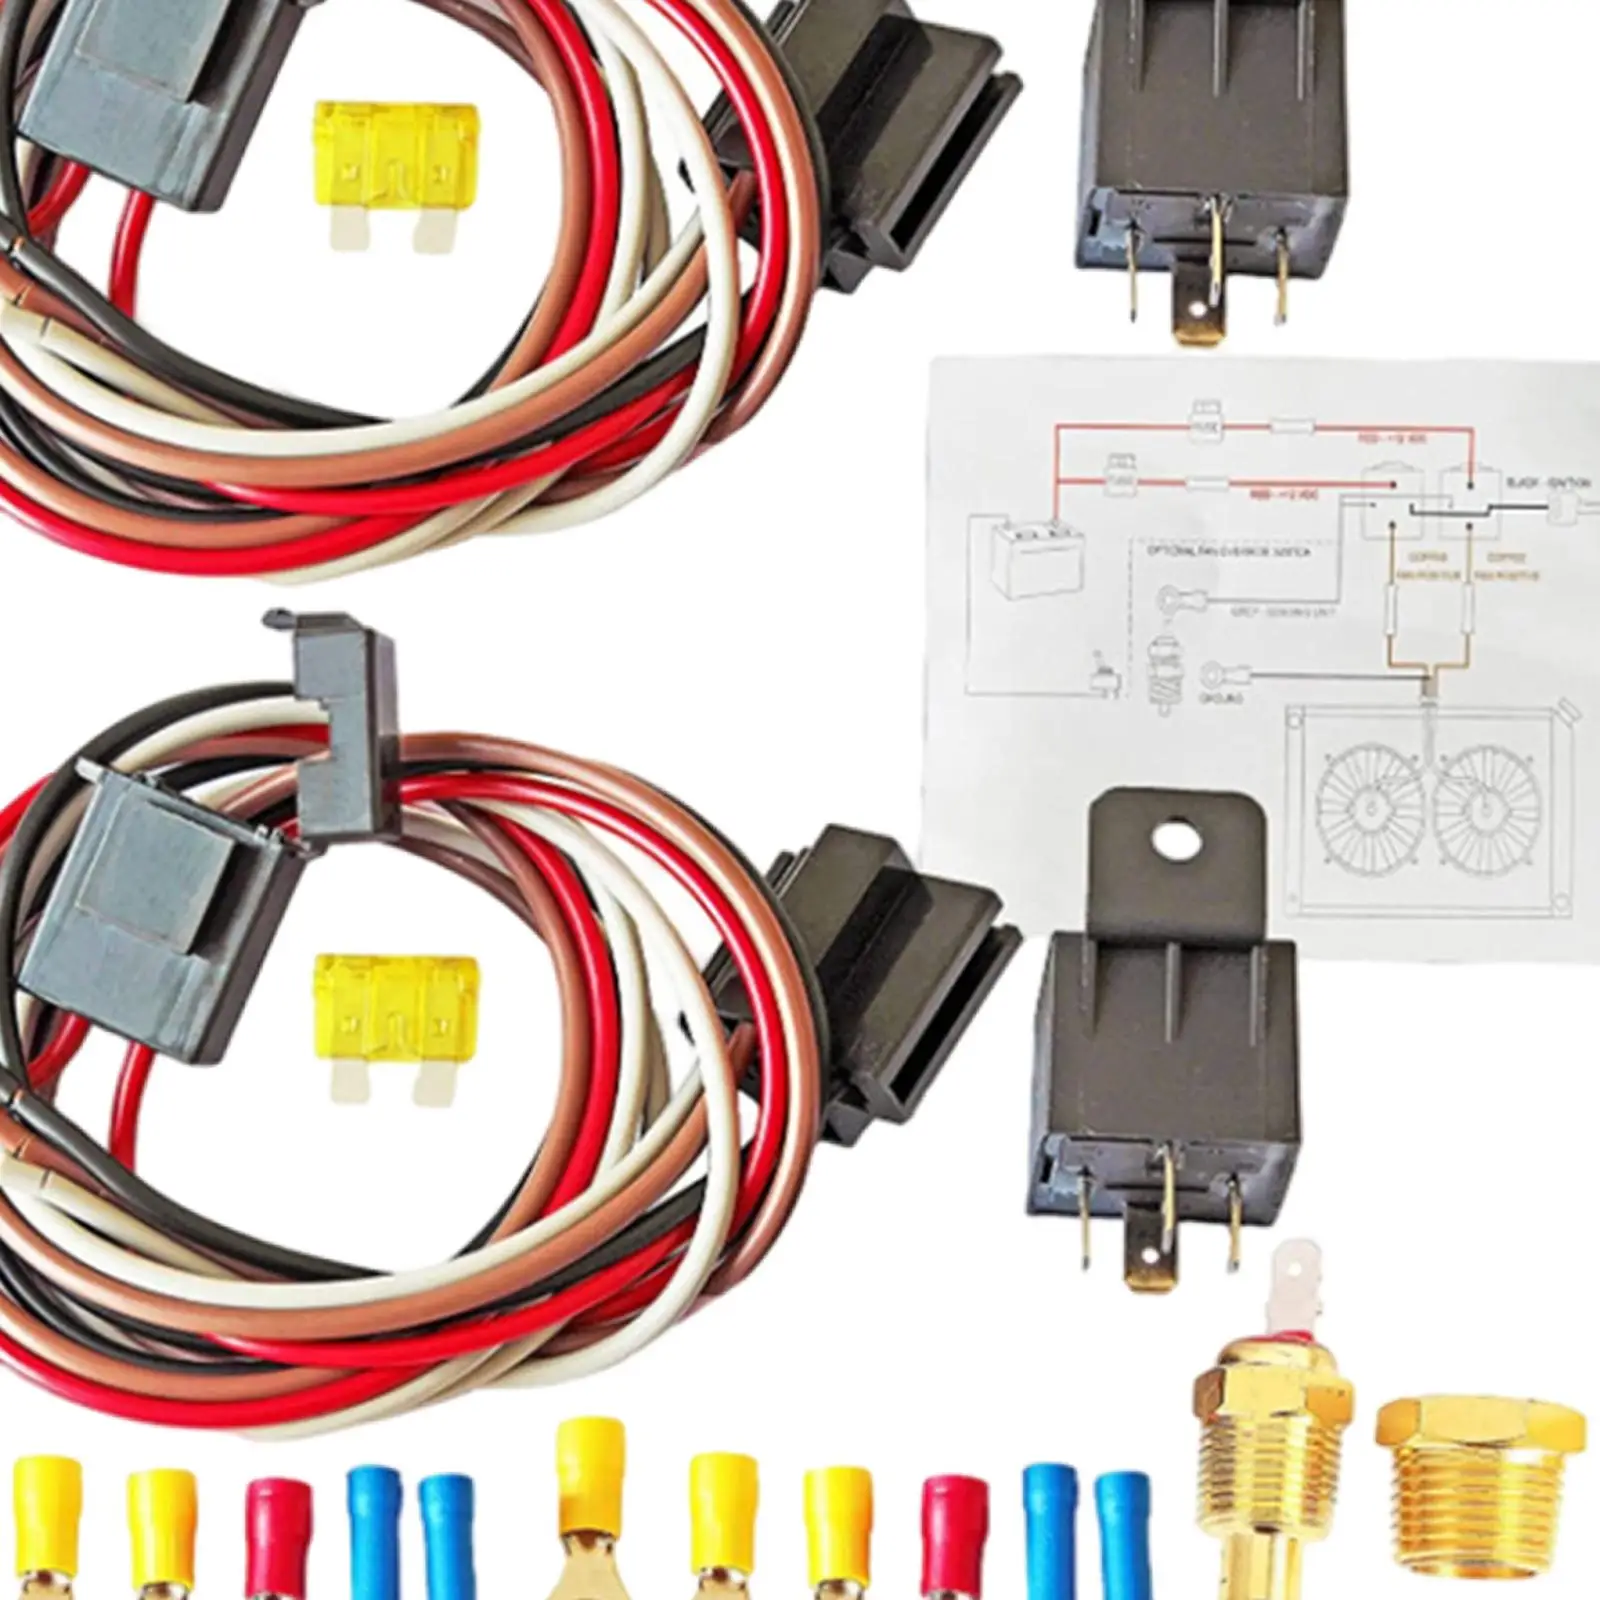 40 Amp Dual Electric Fan Wiring Kit Wiring Relay Kit Automotive Wire Harness Temperature Switch Replacement Easy to Install ACC